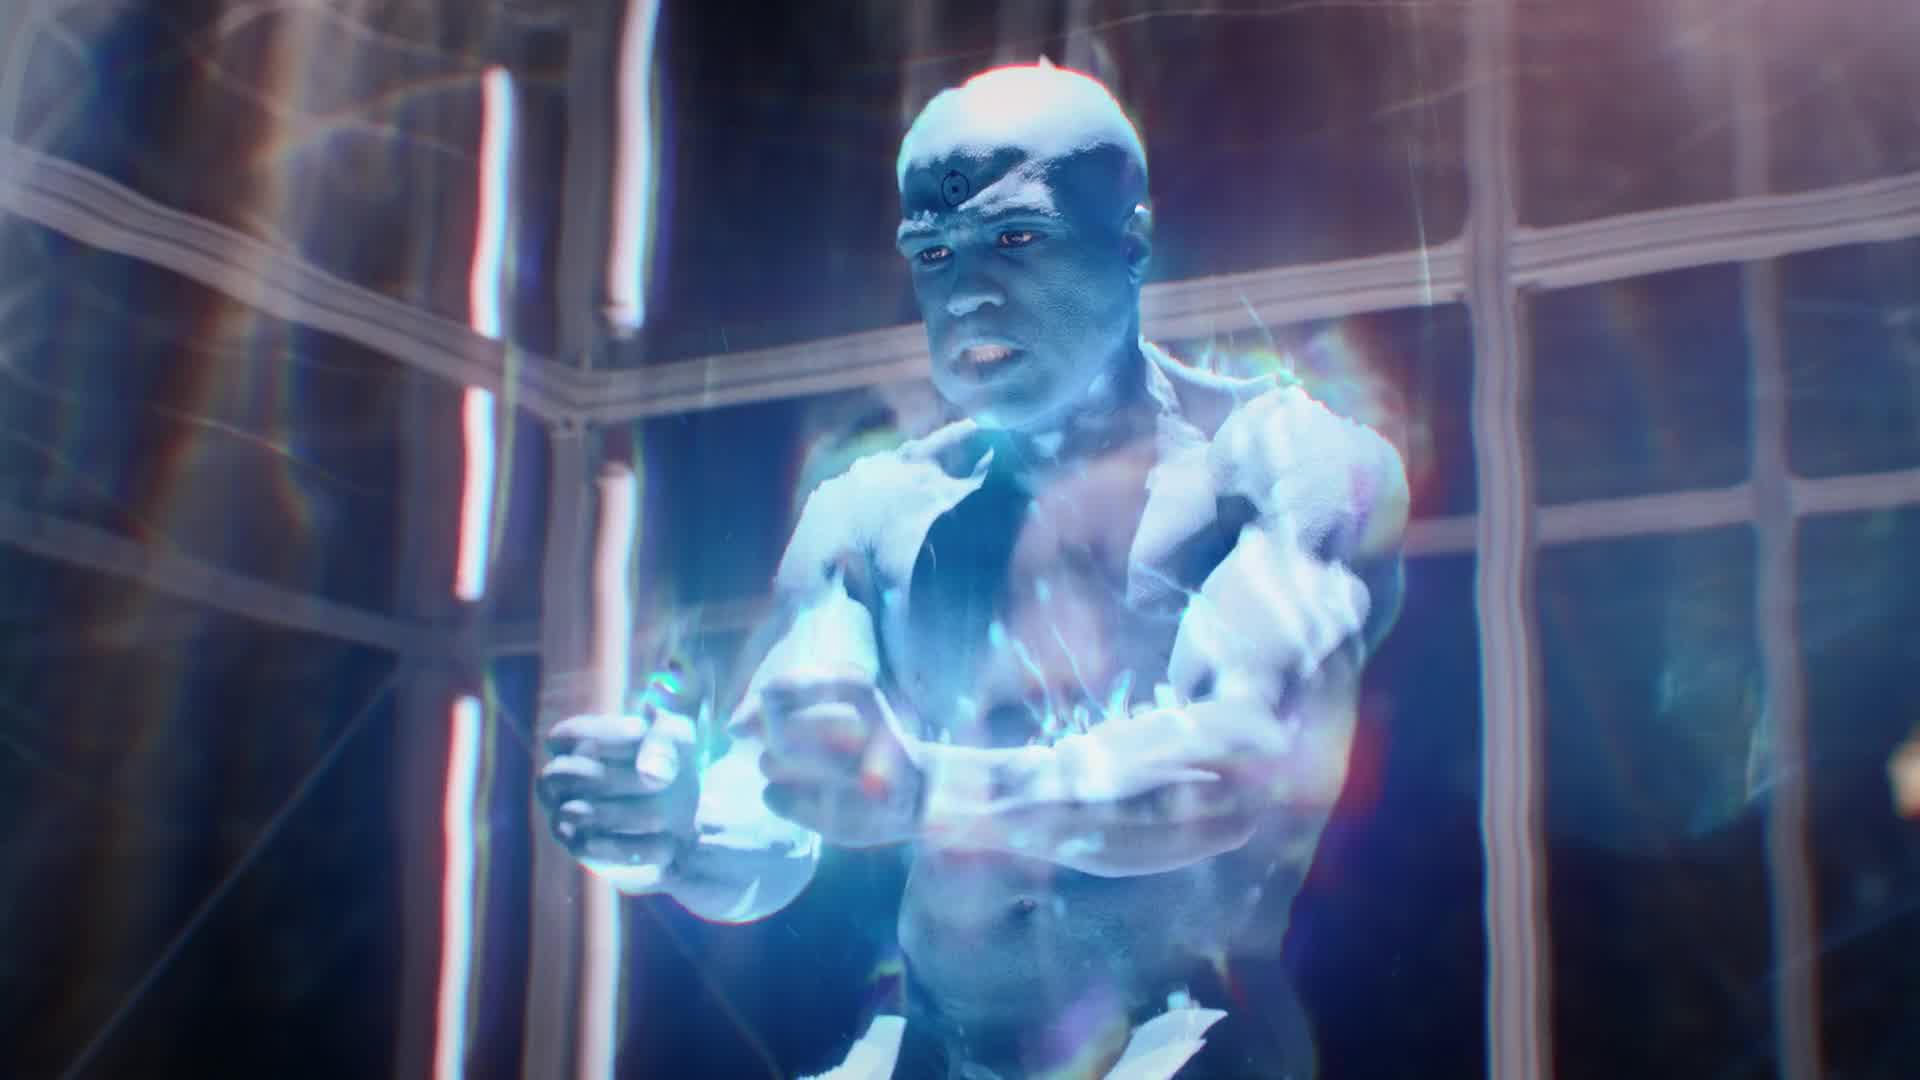 Doctor Manhattan (Yahya Abdul-Mateen II) has his power sapped by The Kavalary in Watchmen Season 1 Episode 9 "See How They Fly" (2019), HBO